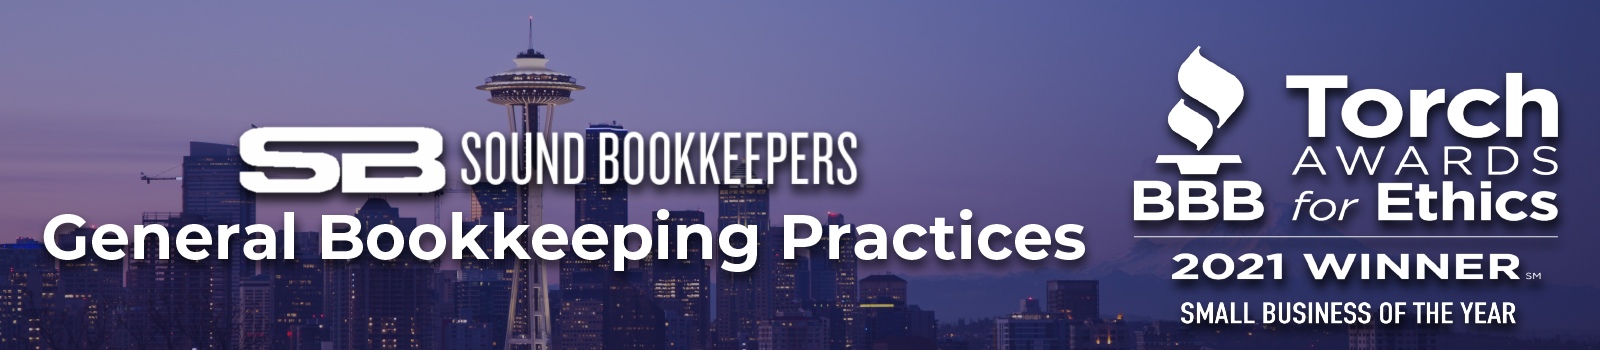 General Bookkeeping Practices – Banner